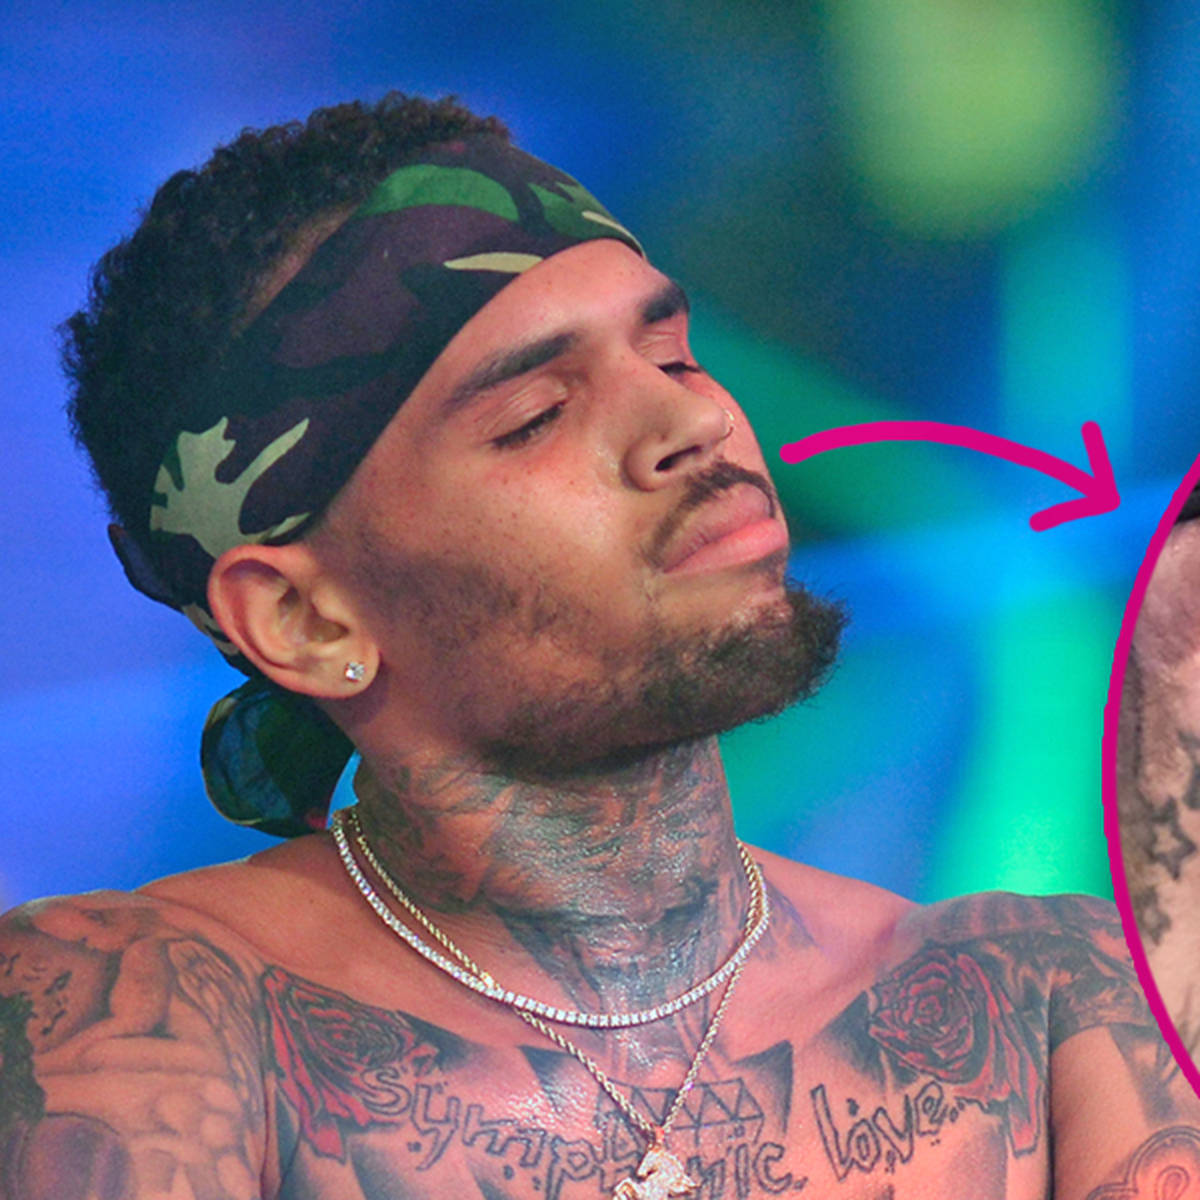 Chris Brown shows off controversial 'sneaker' face tattoo in first close-up photo - Capital XTRA